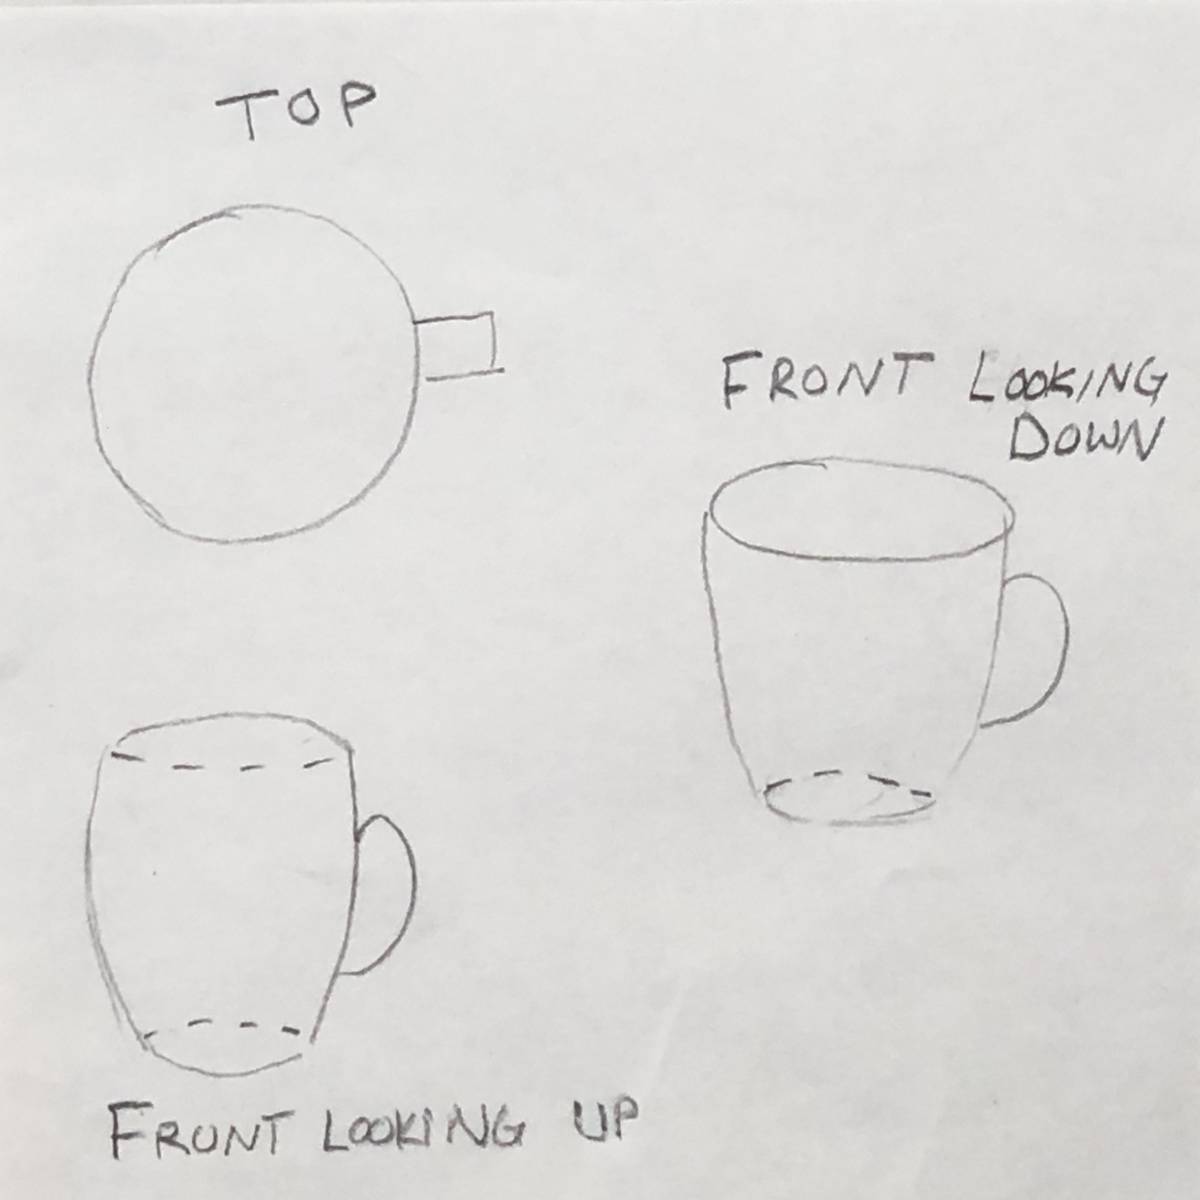 Sketch of different perspective viewpoints of drawing a coffee mug.